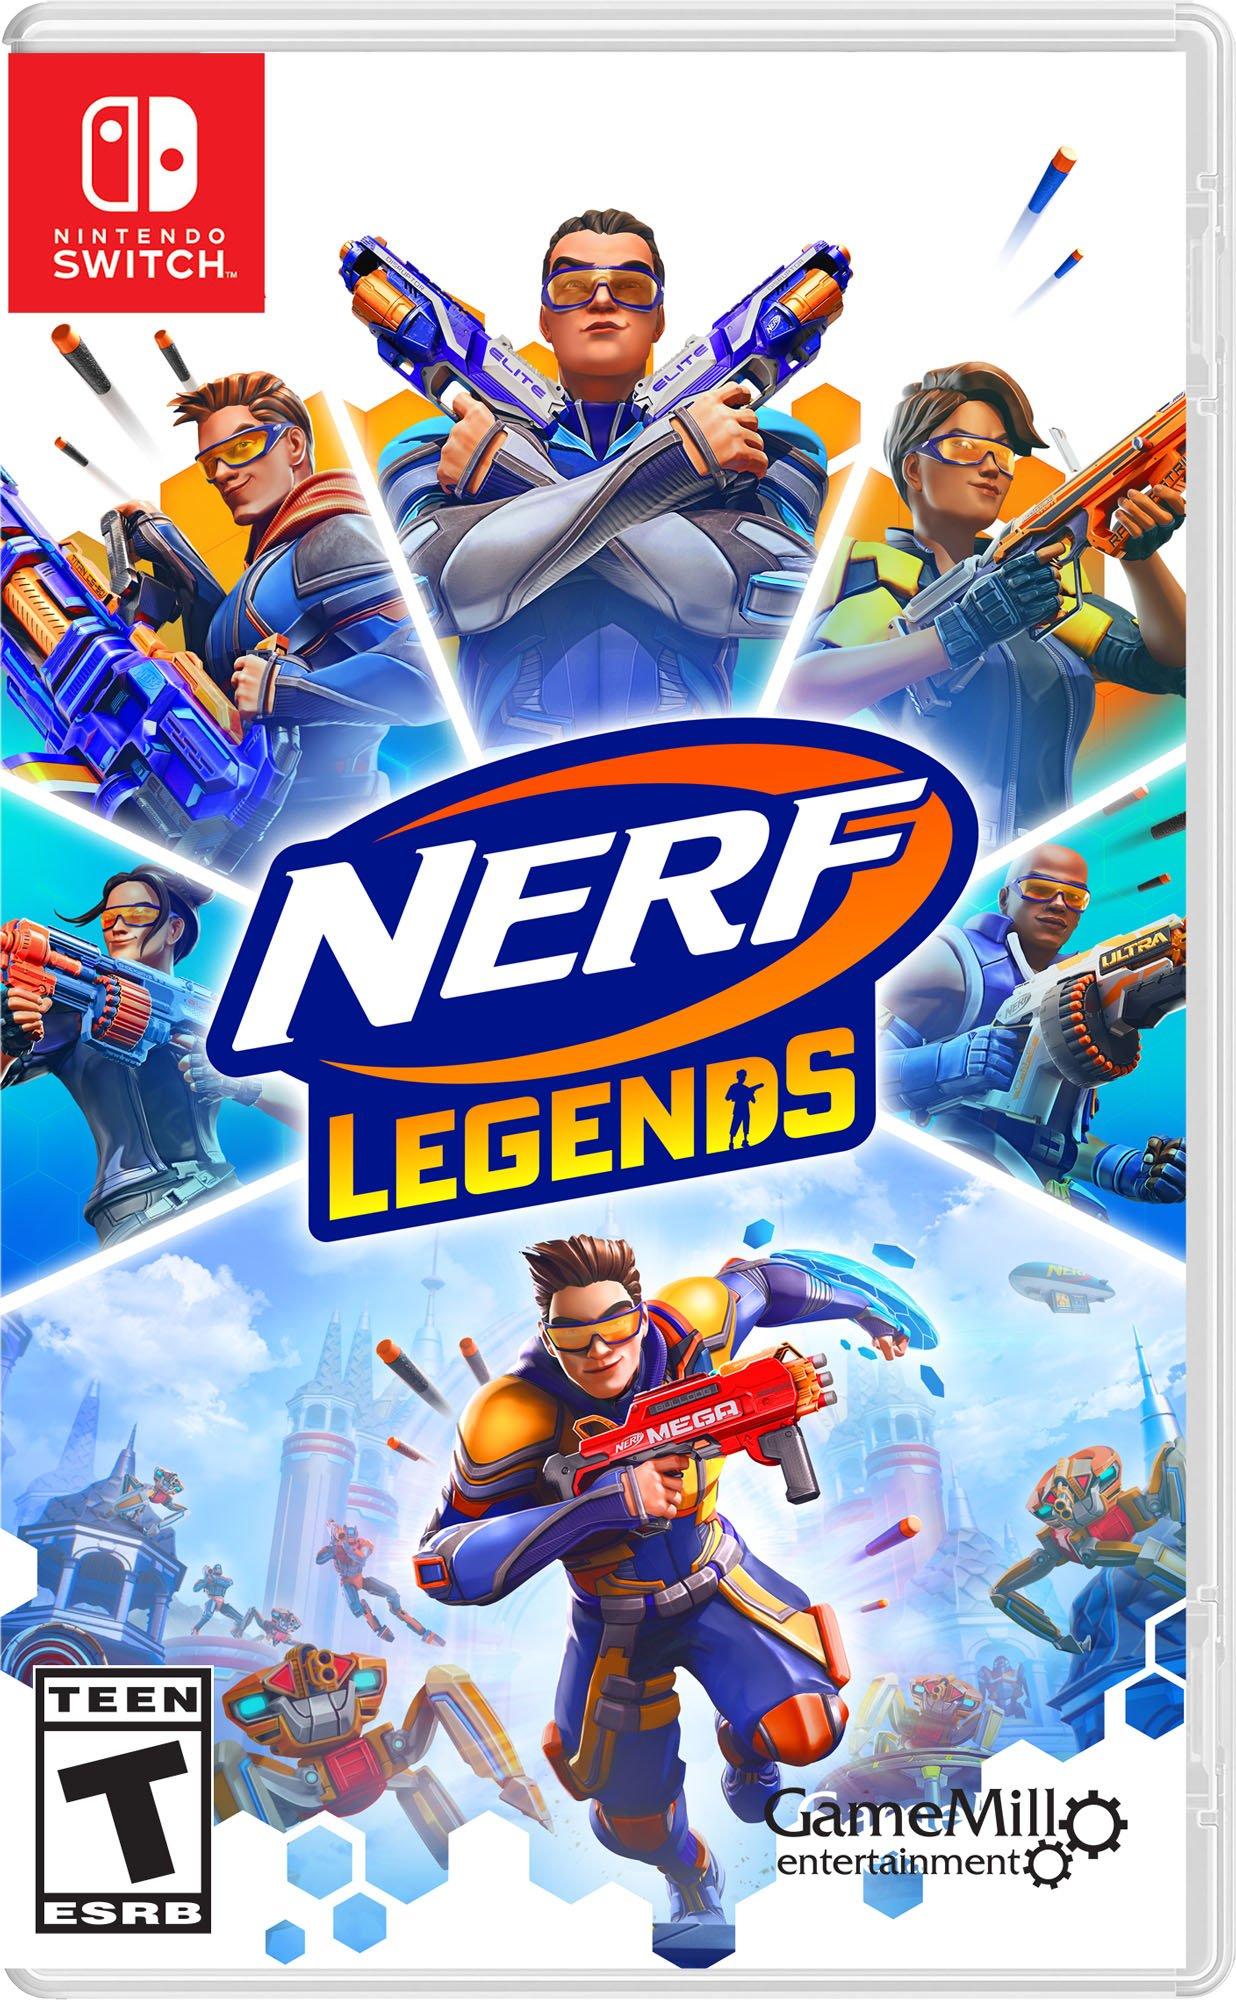 NERF Legends - Rex-Rampage Pack for Nintendo Switch - Nintendo